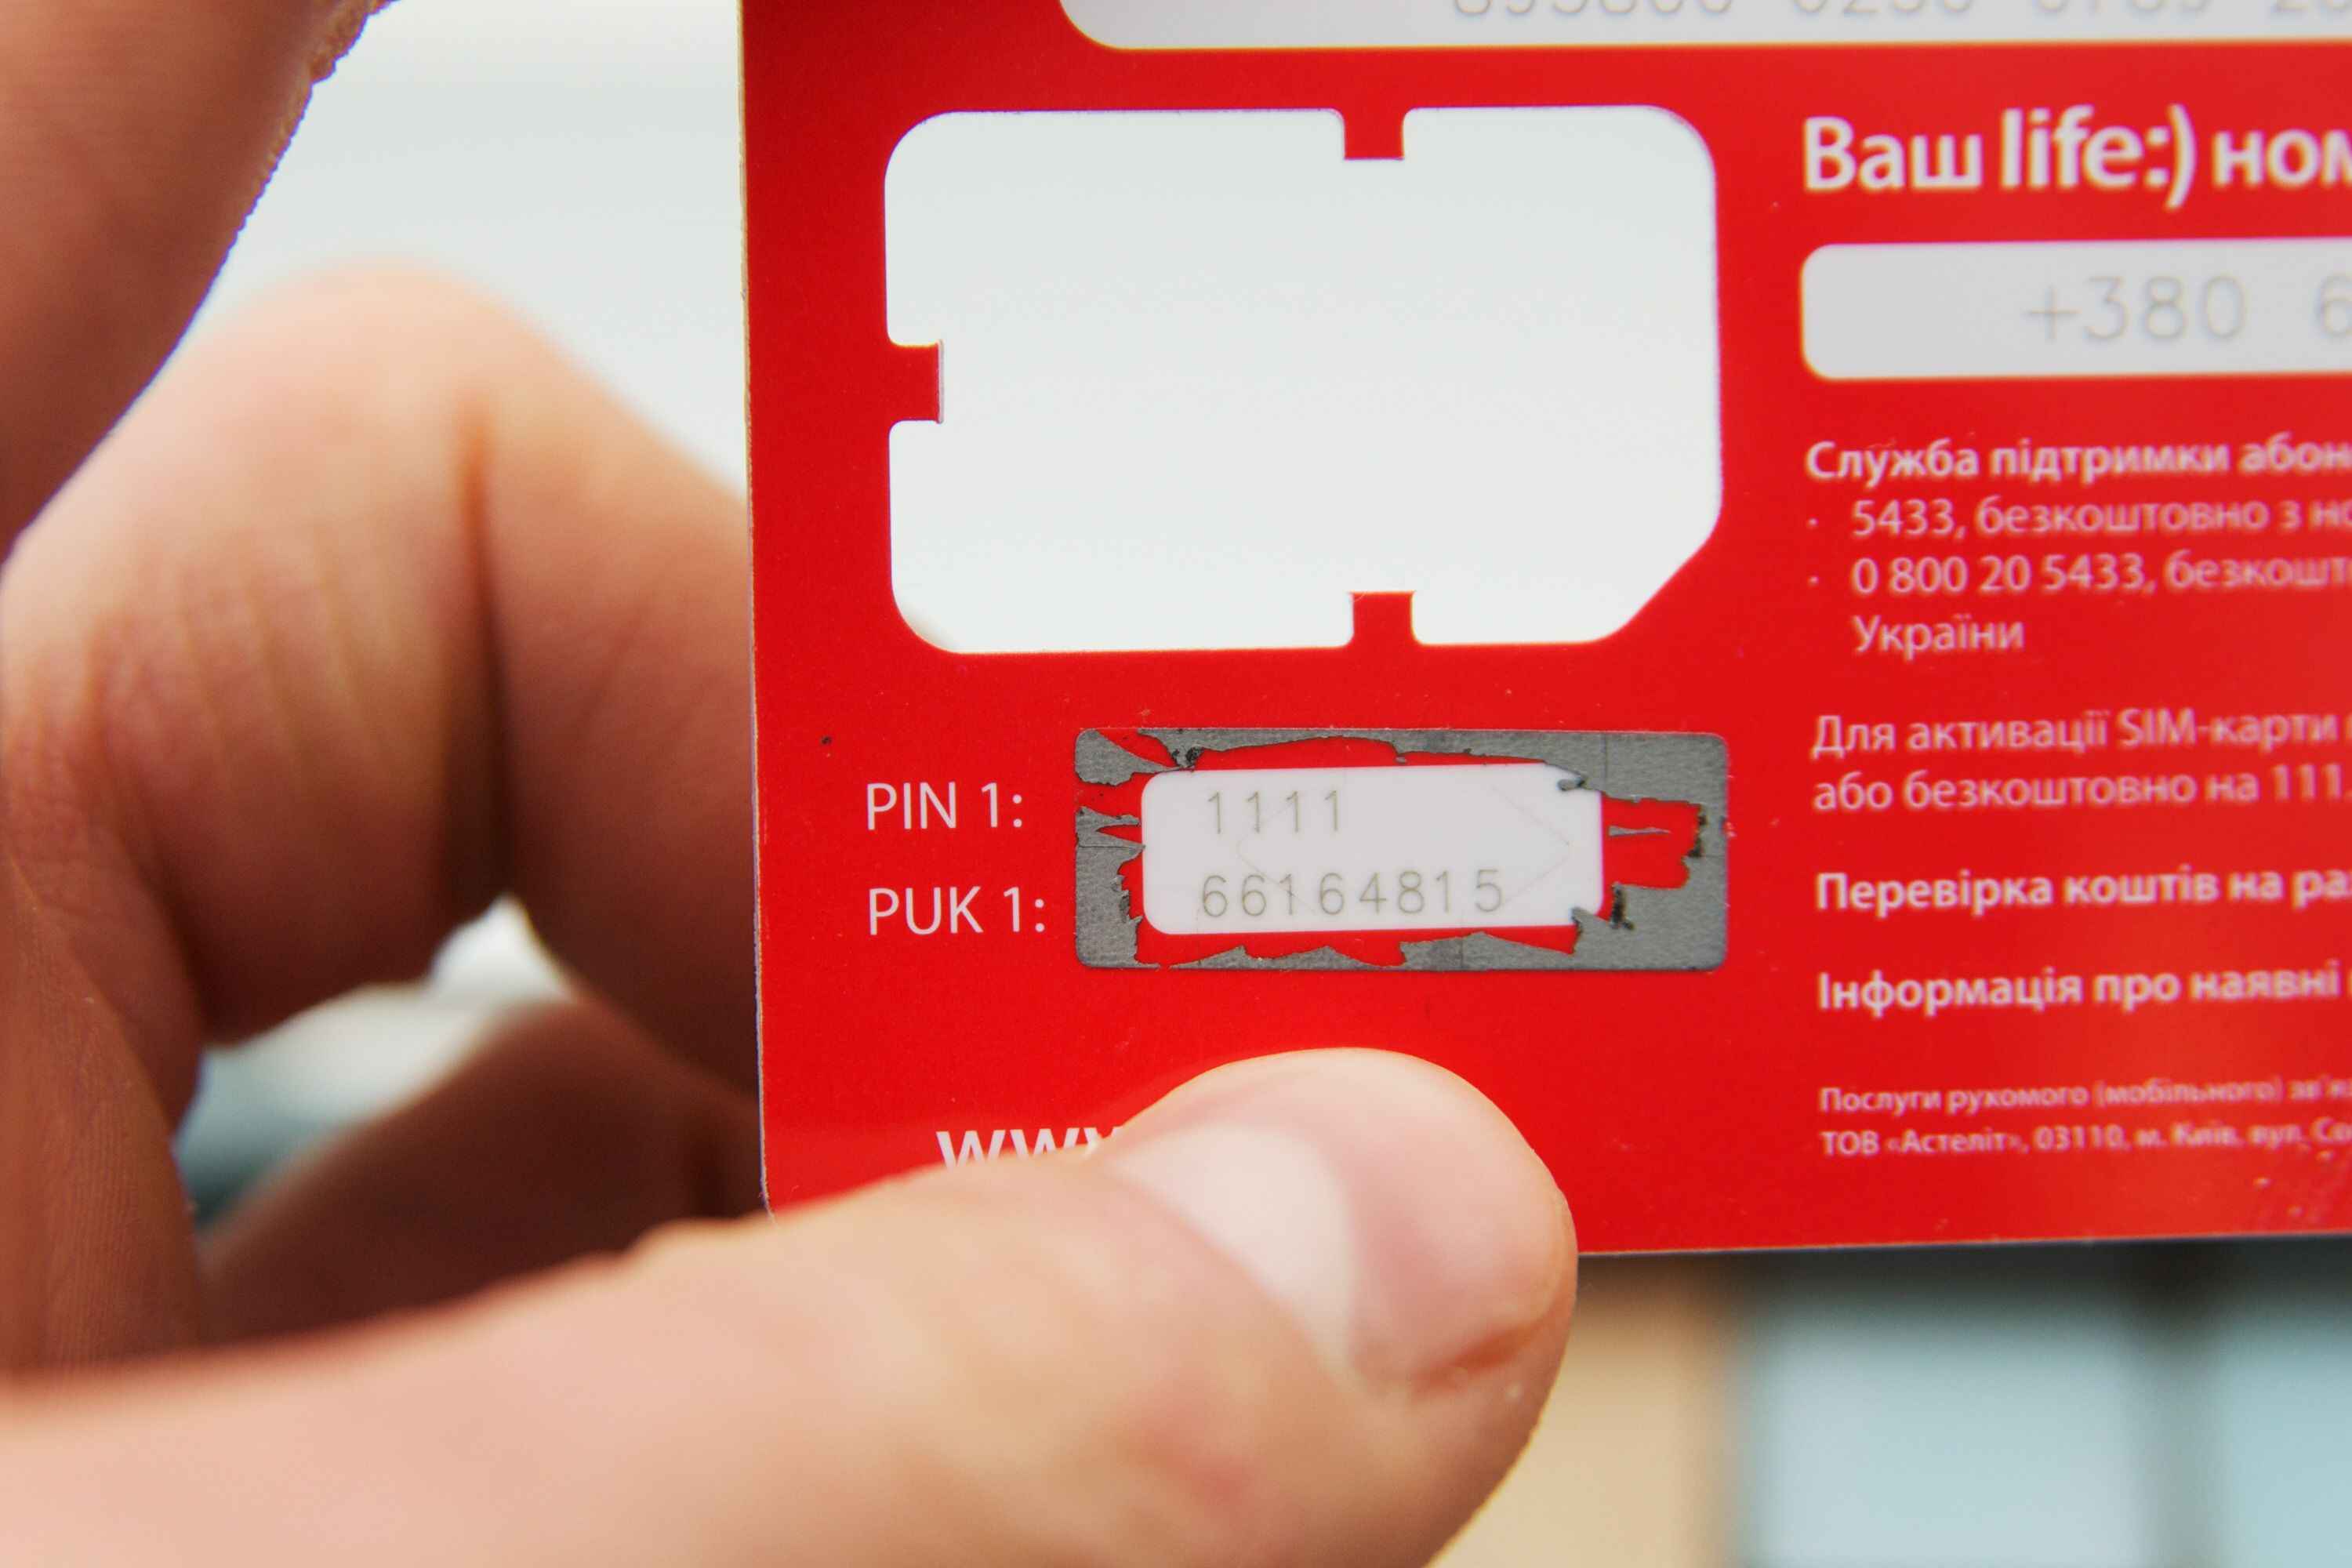 Understanding The PUK Code For Your SIM Card